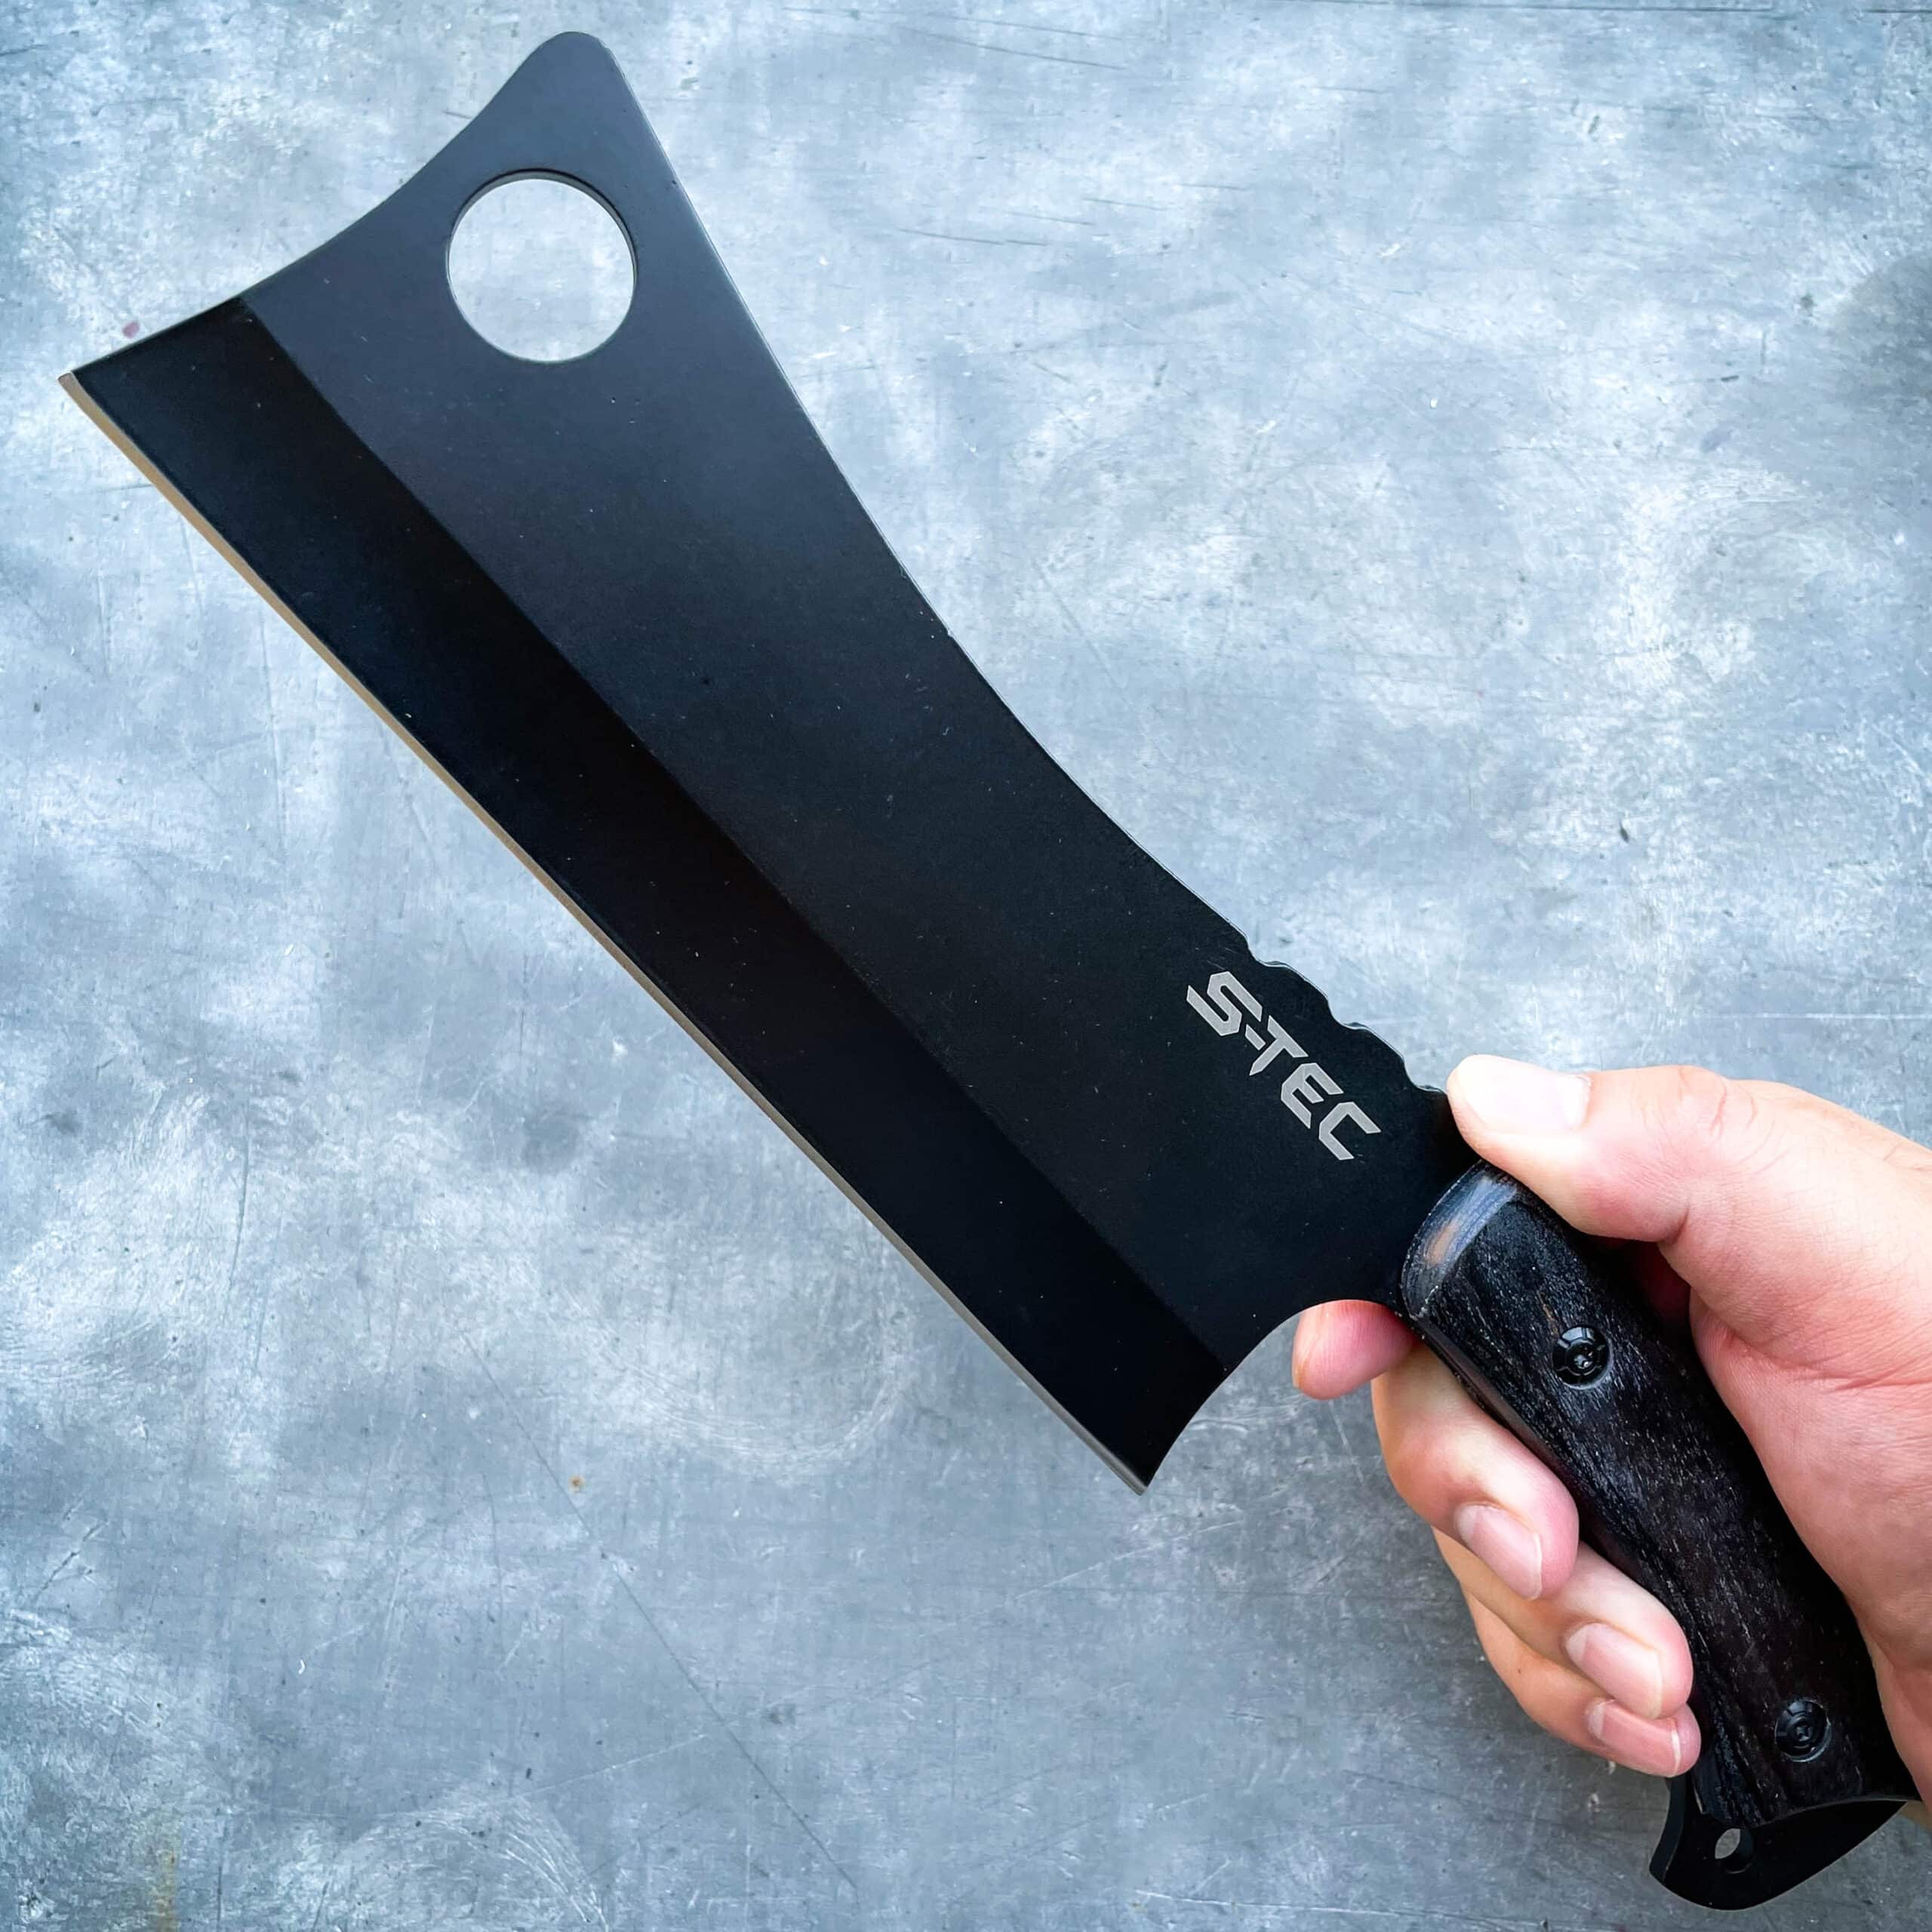 12" BLACK CLEAVER BLADE CHEF BUTCHER KNIFE Stainless Steel Full Tang Kitchen